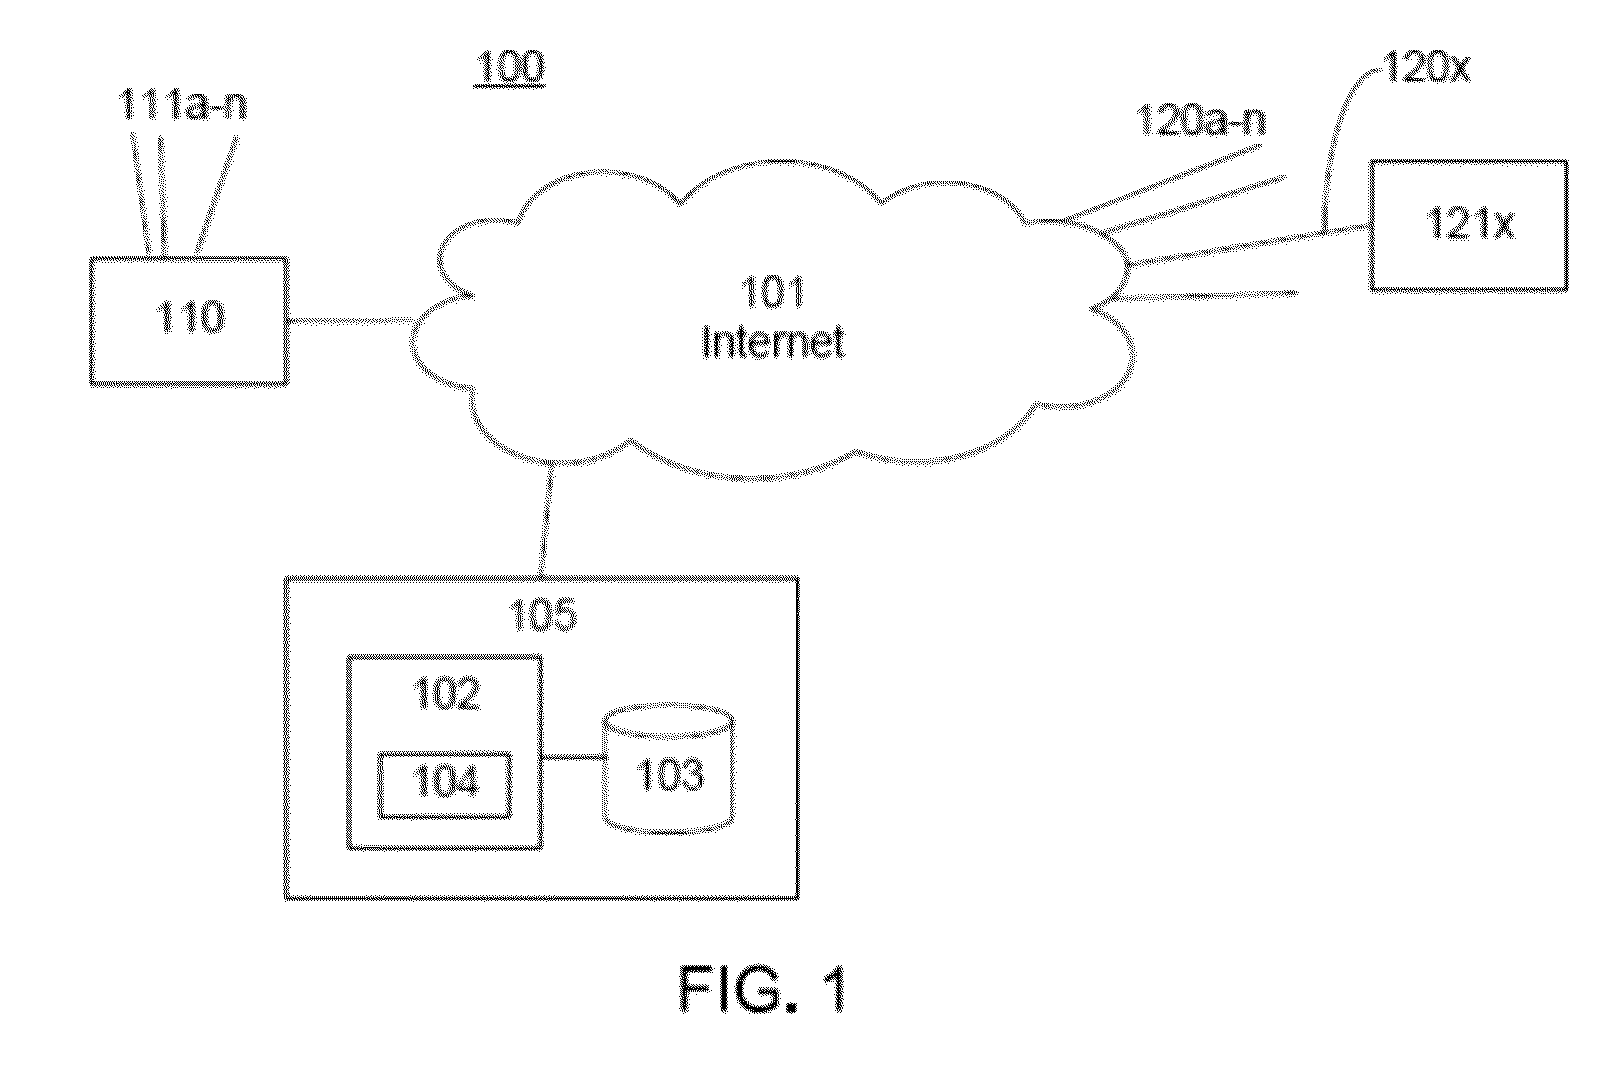 Enhanced electronic data and metadata interchange system and process for electronic billing and payment system